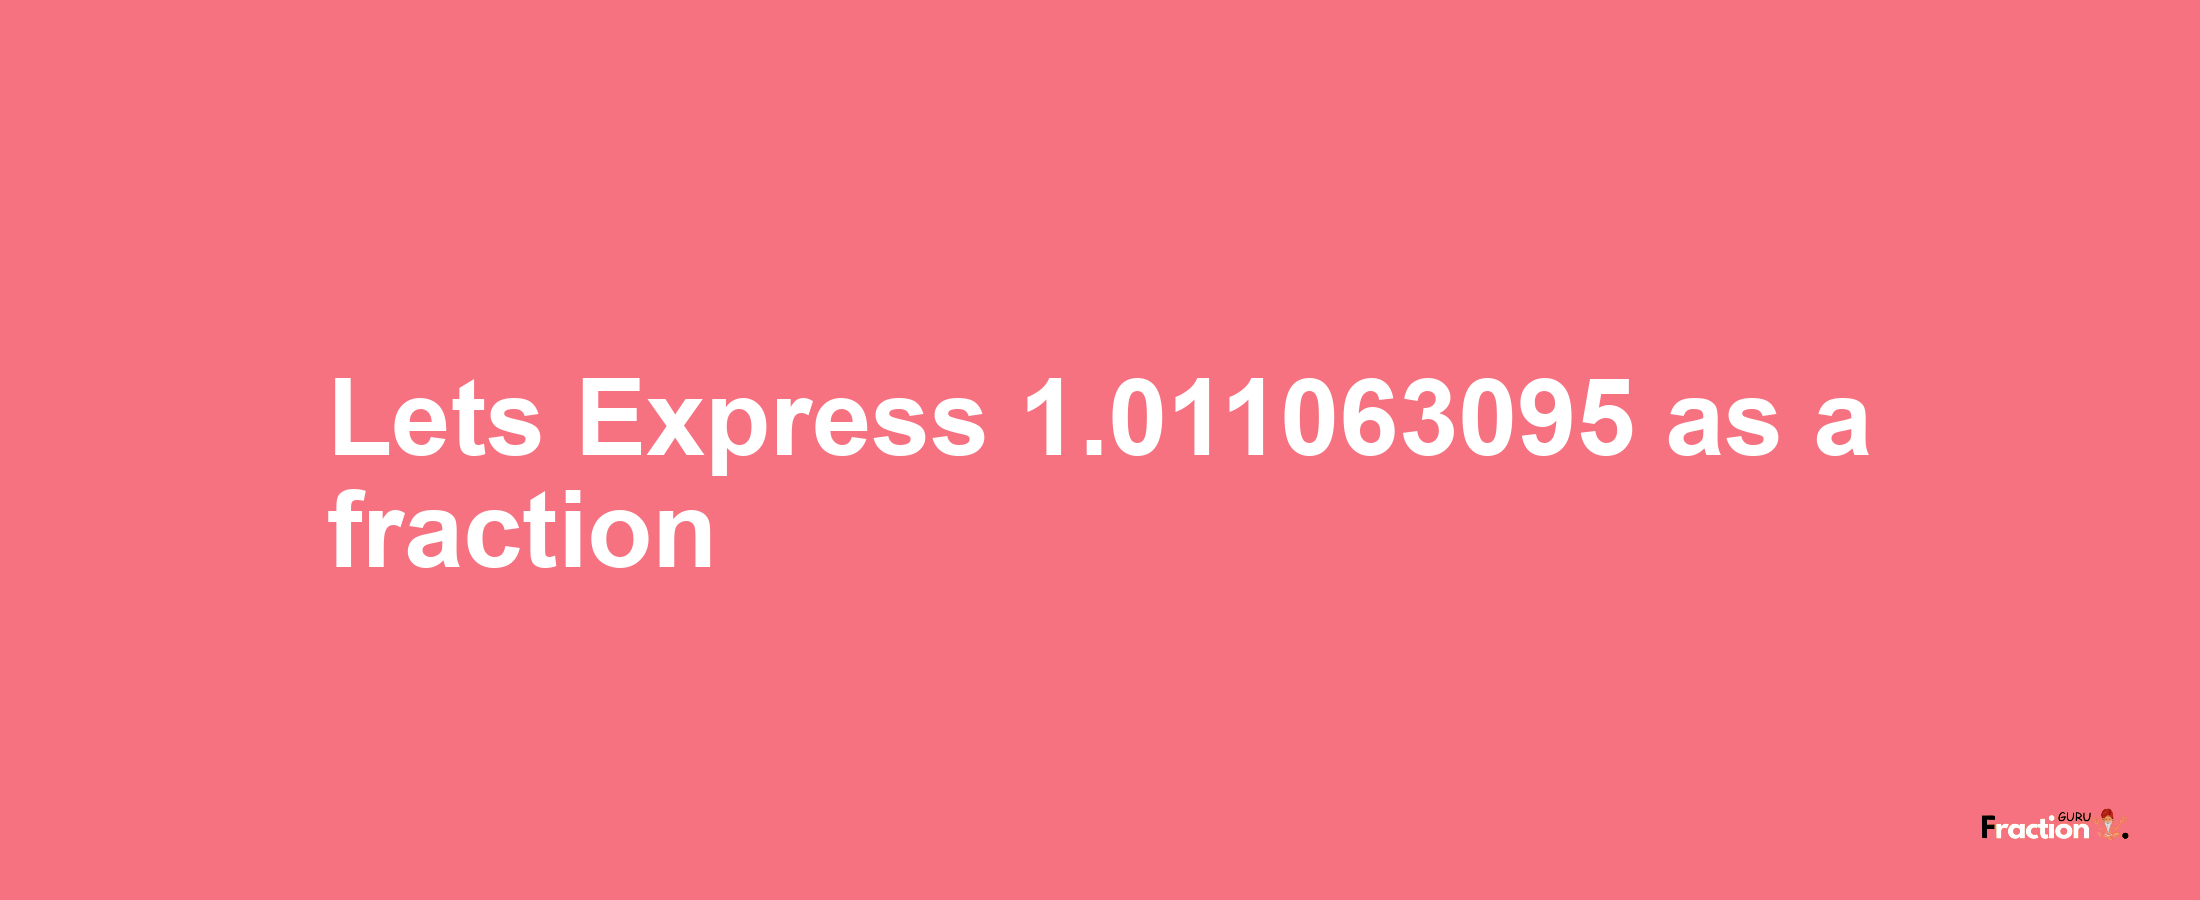 Lets Express 1.011063095 as afraction